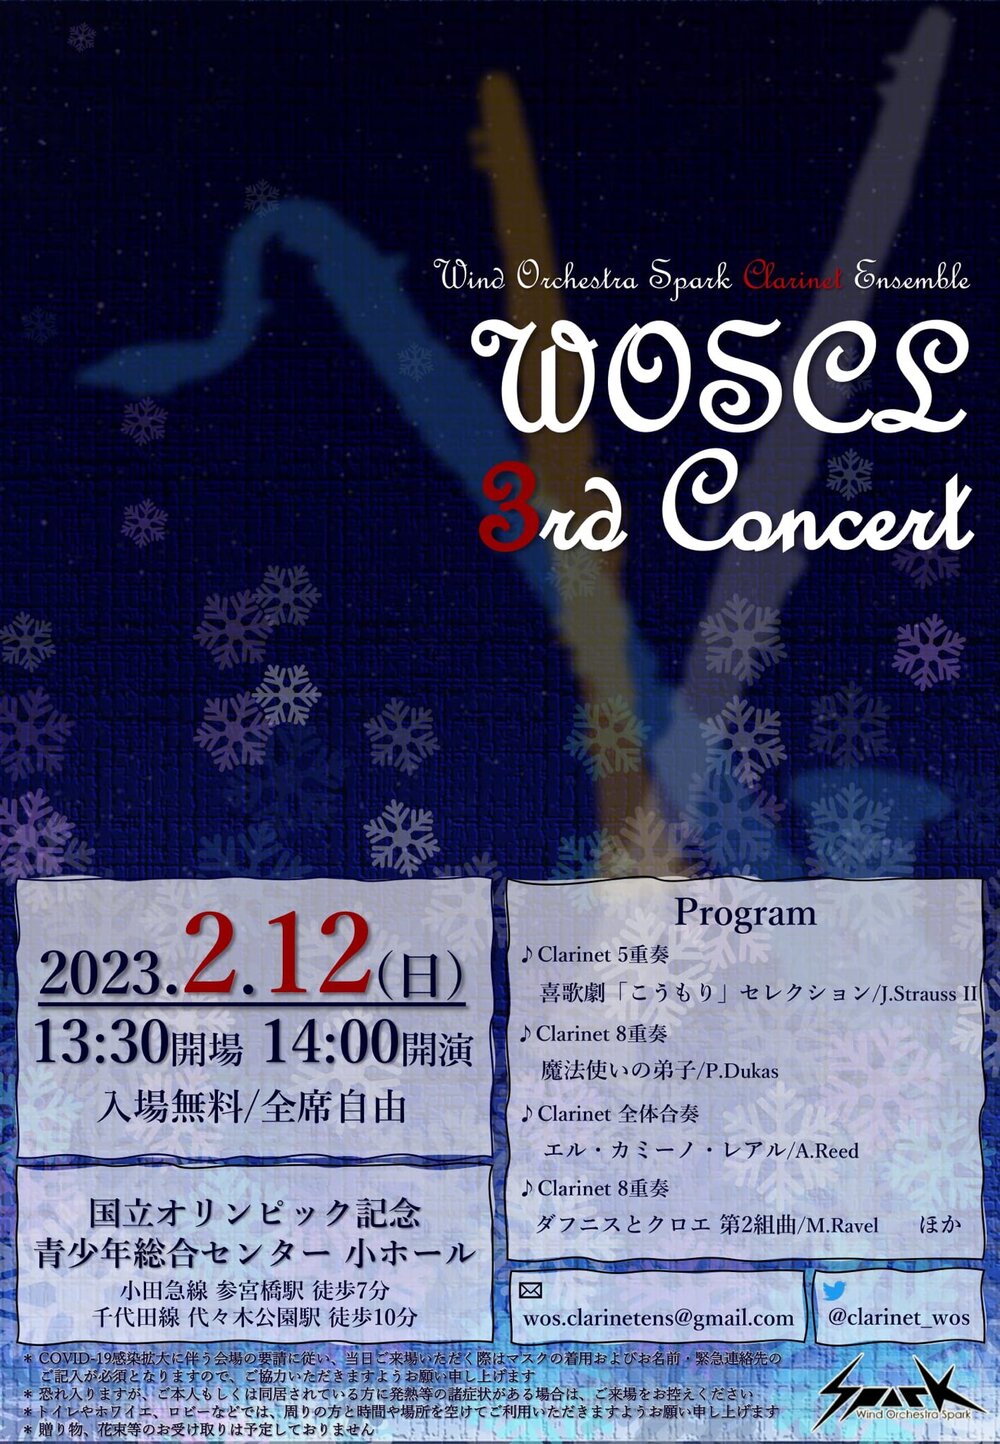 WOSCL 3rd concert【Wind Orchestra Spark】 | 国立オリンピック